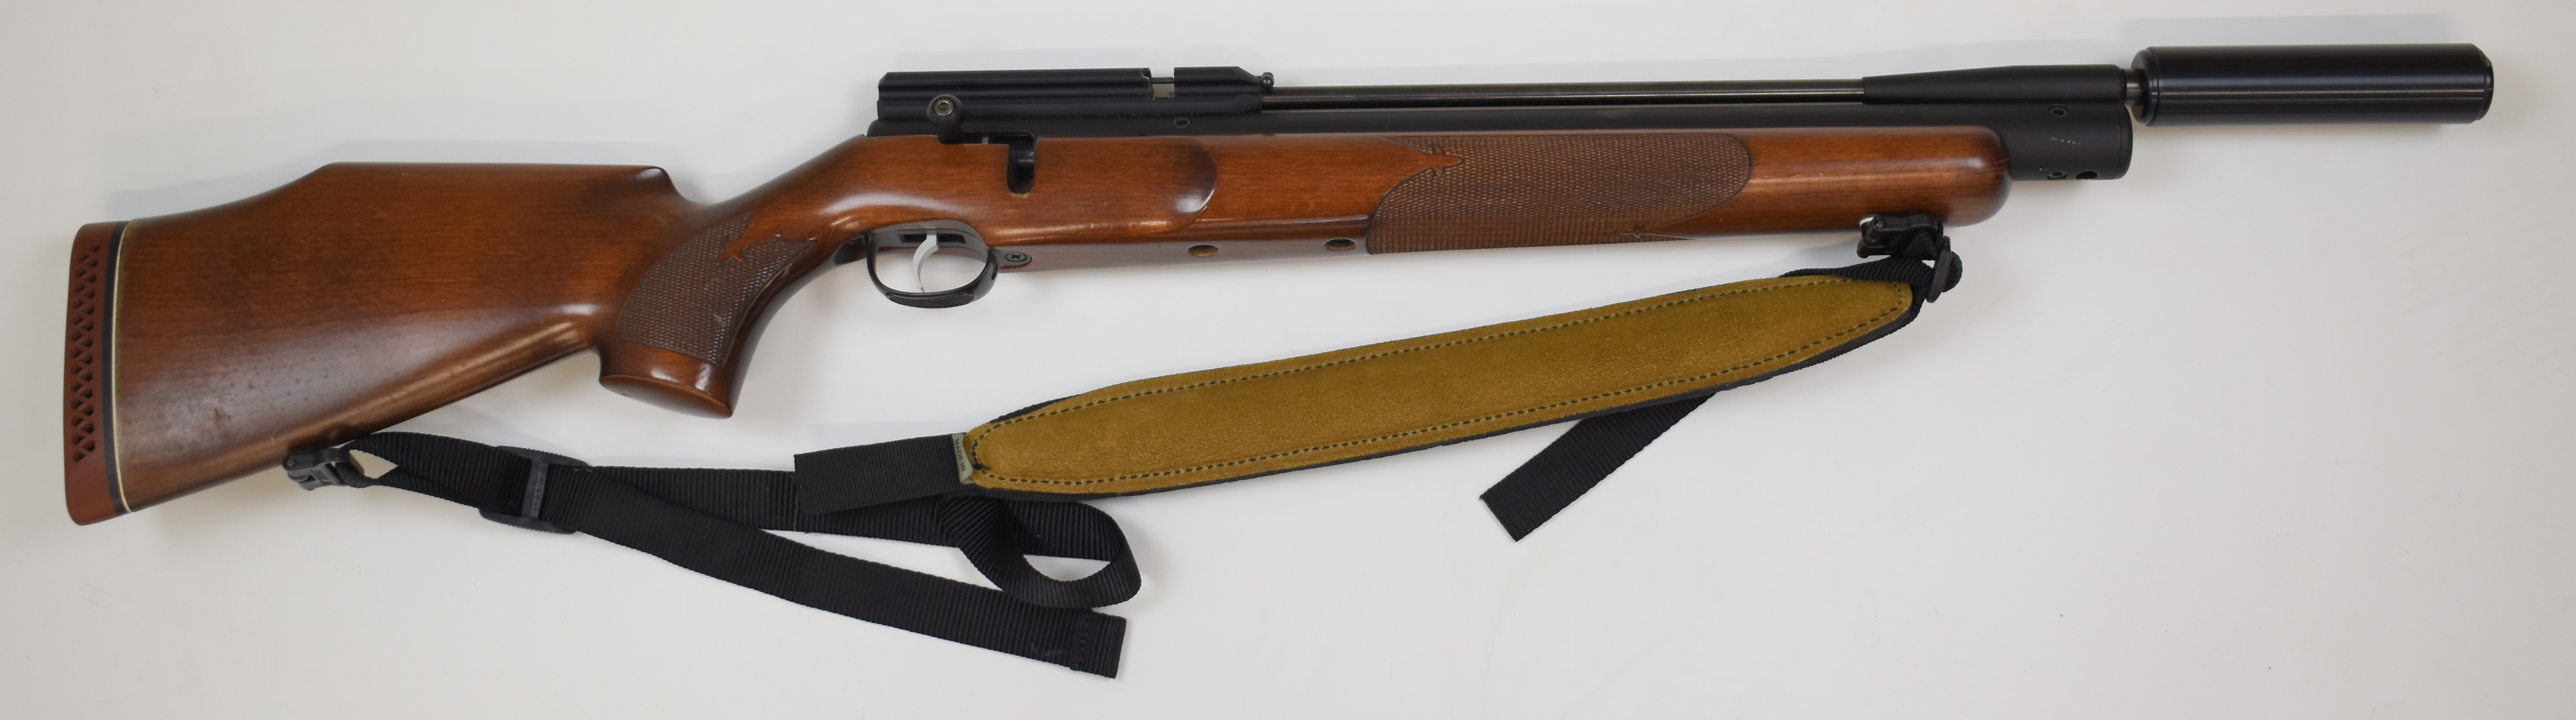 Webley Axsor .22 PCP air rifle with chequered semi-pistol grip and forend, raised cheek piece, - Image 2 of 20